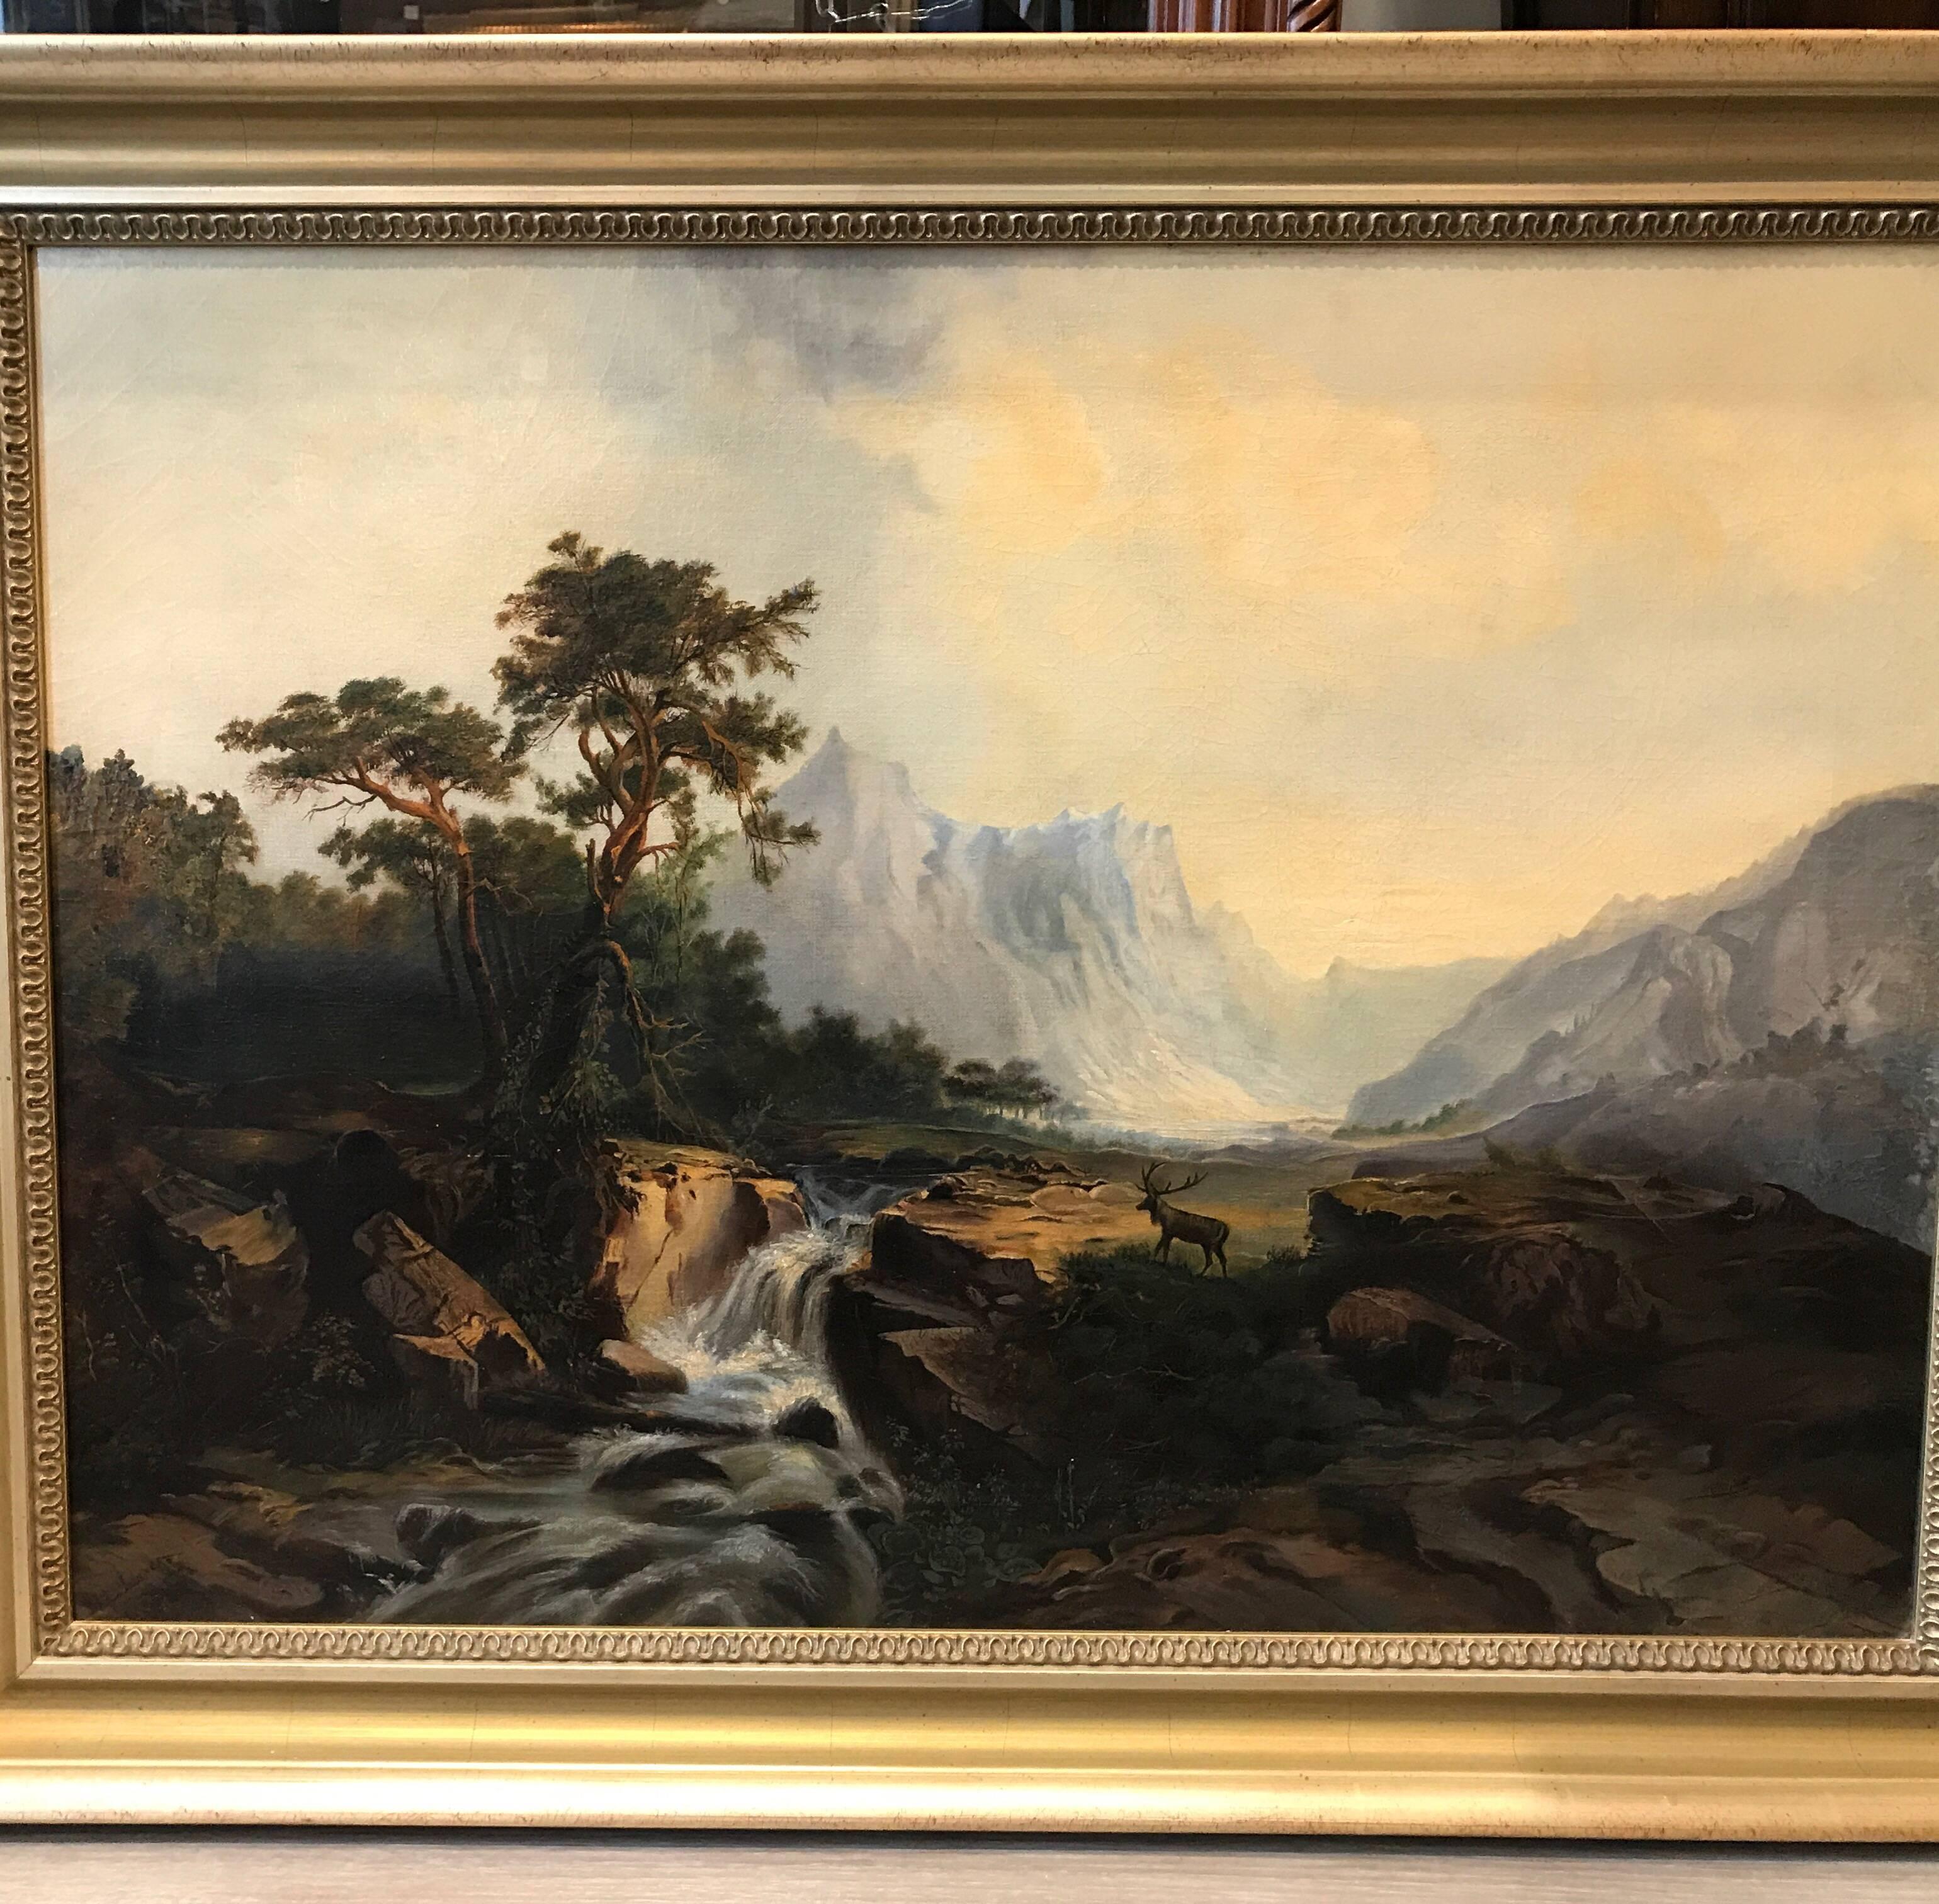 Late 19th Century Antique 19th Cent. European Oil Painting on Canvas Signed M. L. Tunner, 1872